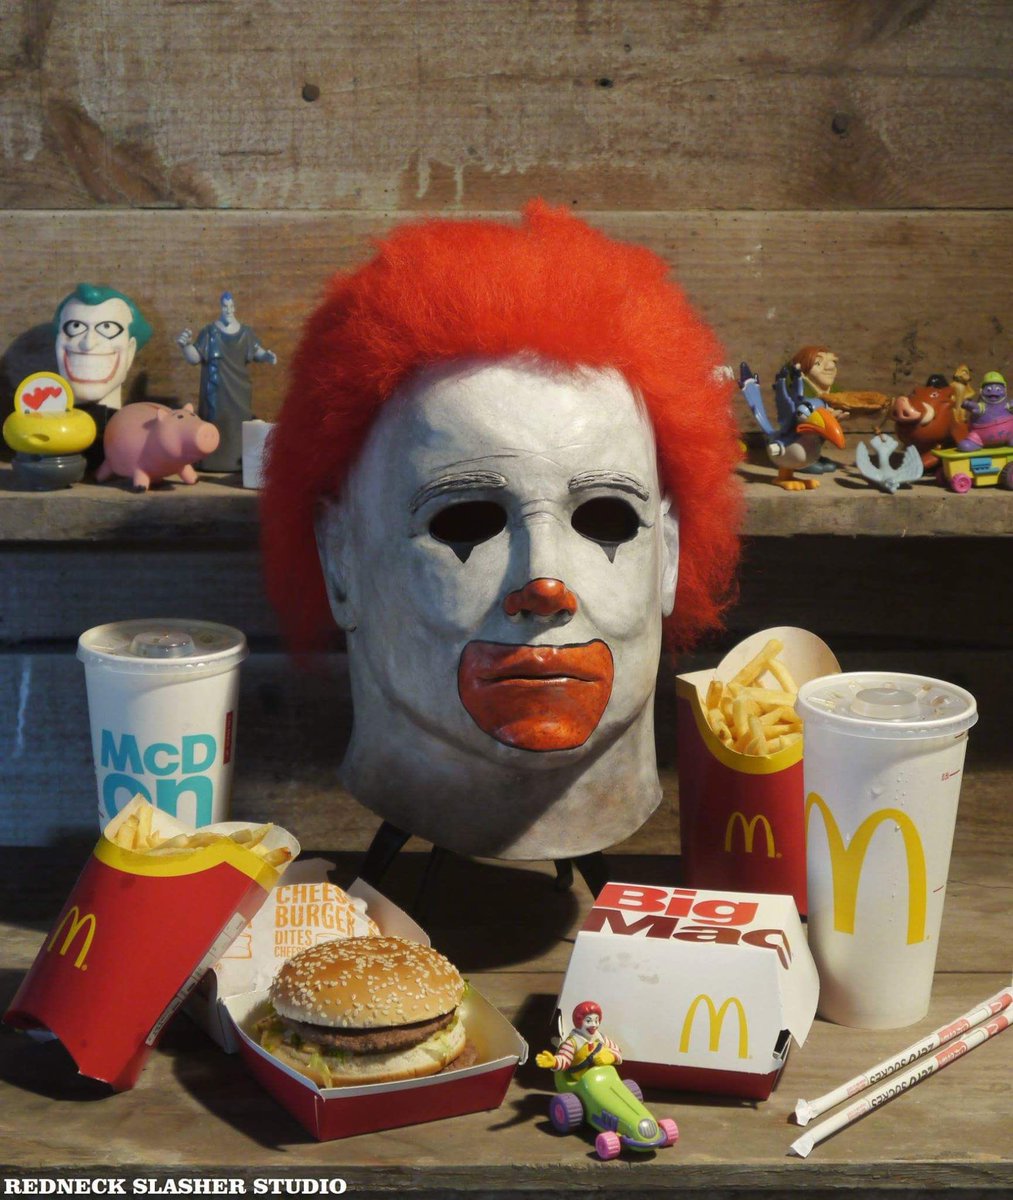 It’s #NationalCheeseBurgerDay. Everyone’s entitled to one good juicy cheeseburger except Michael Myers. Damn him